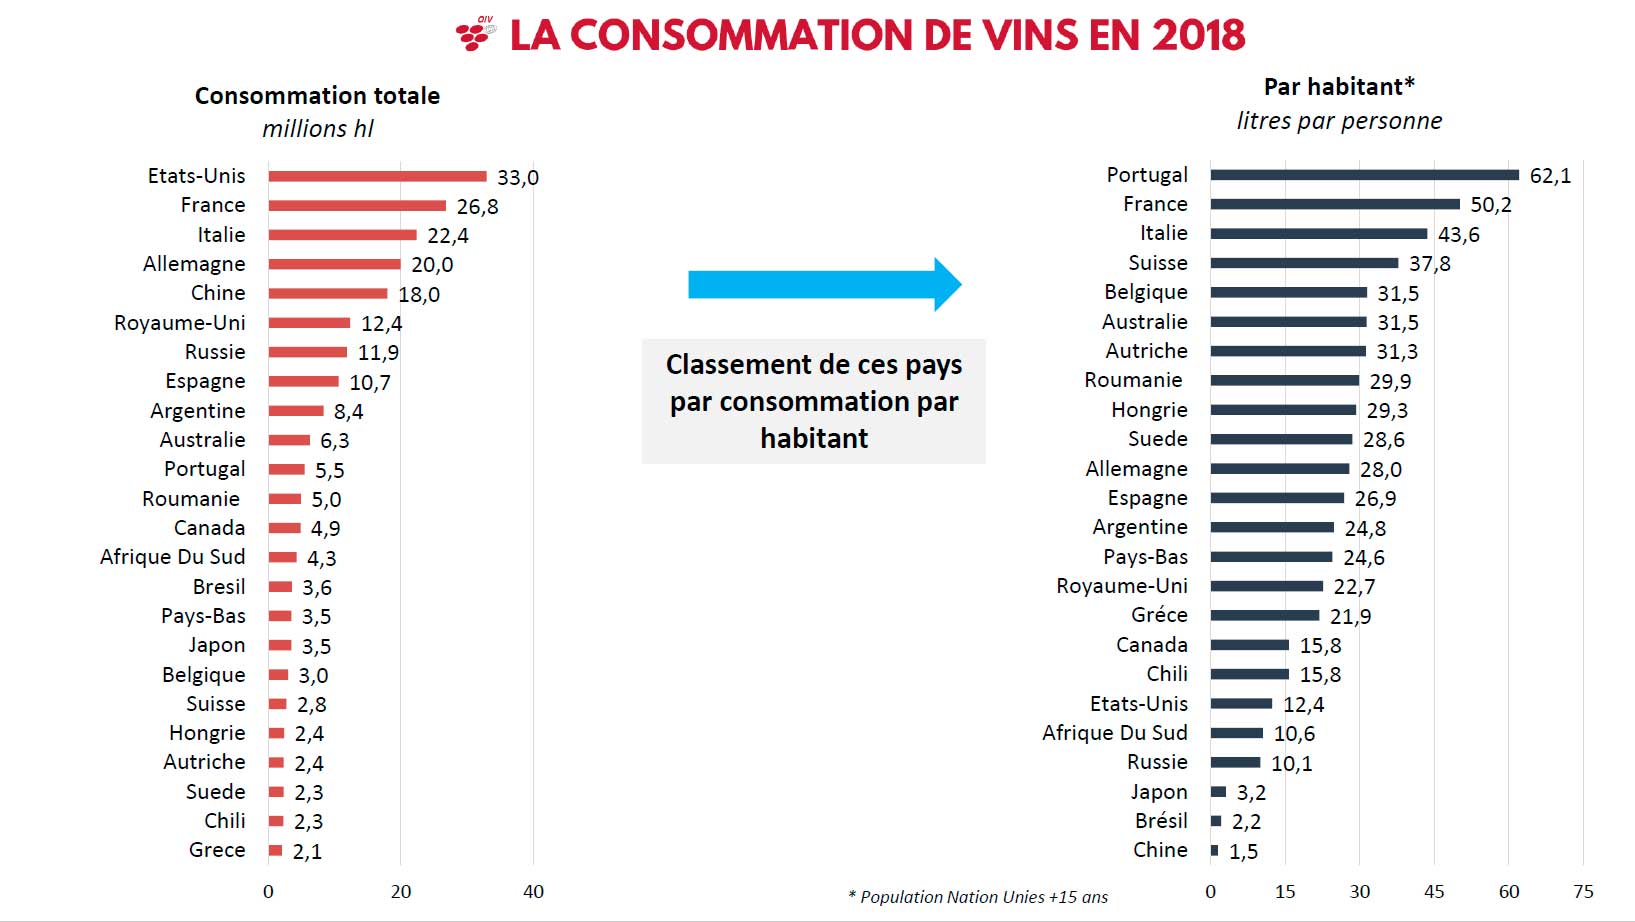 World wine consumption by country per capita 2018